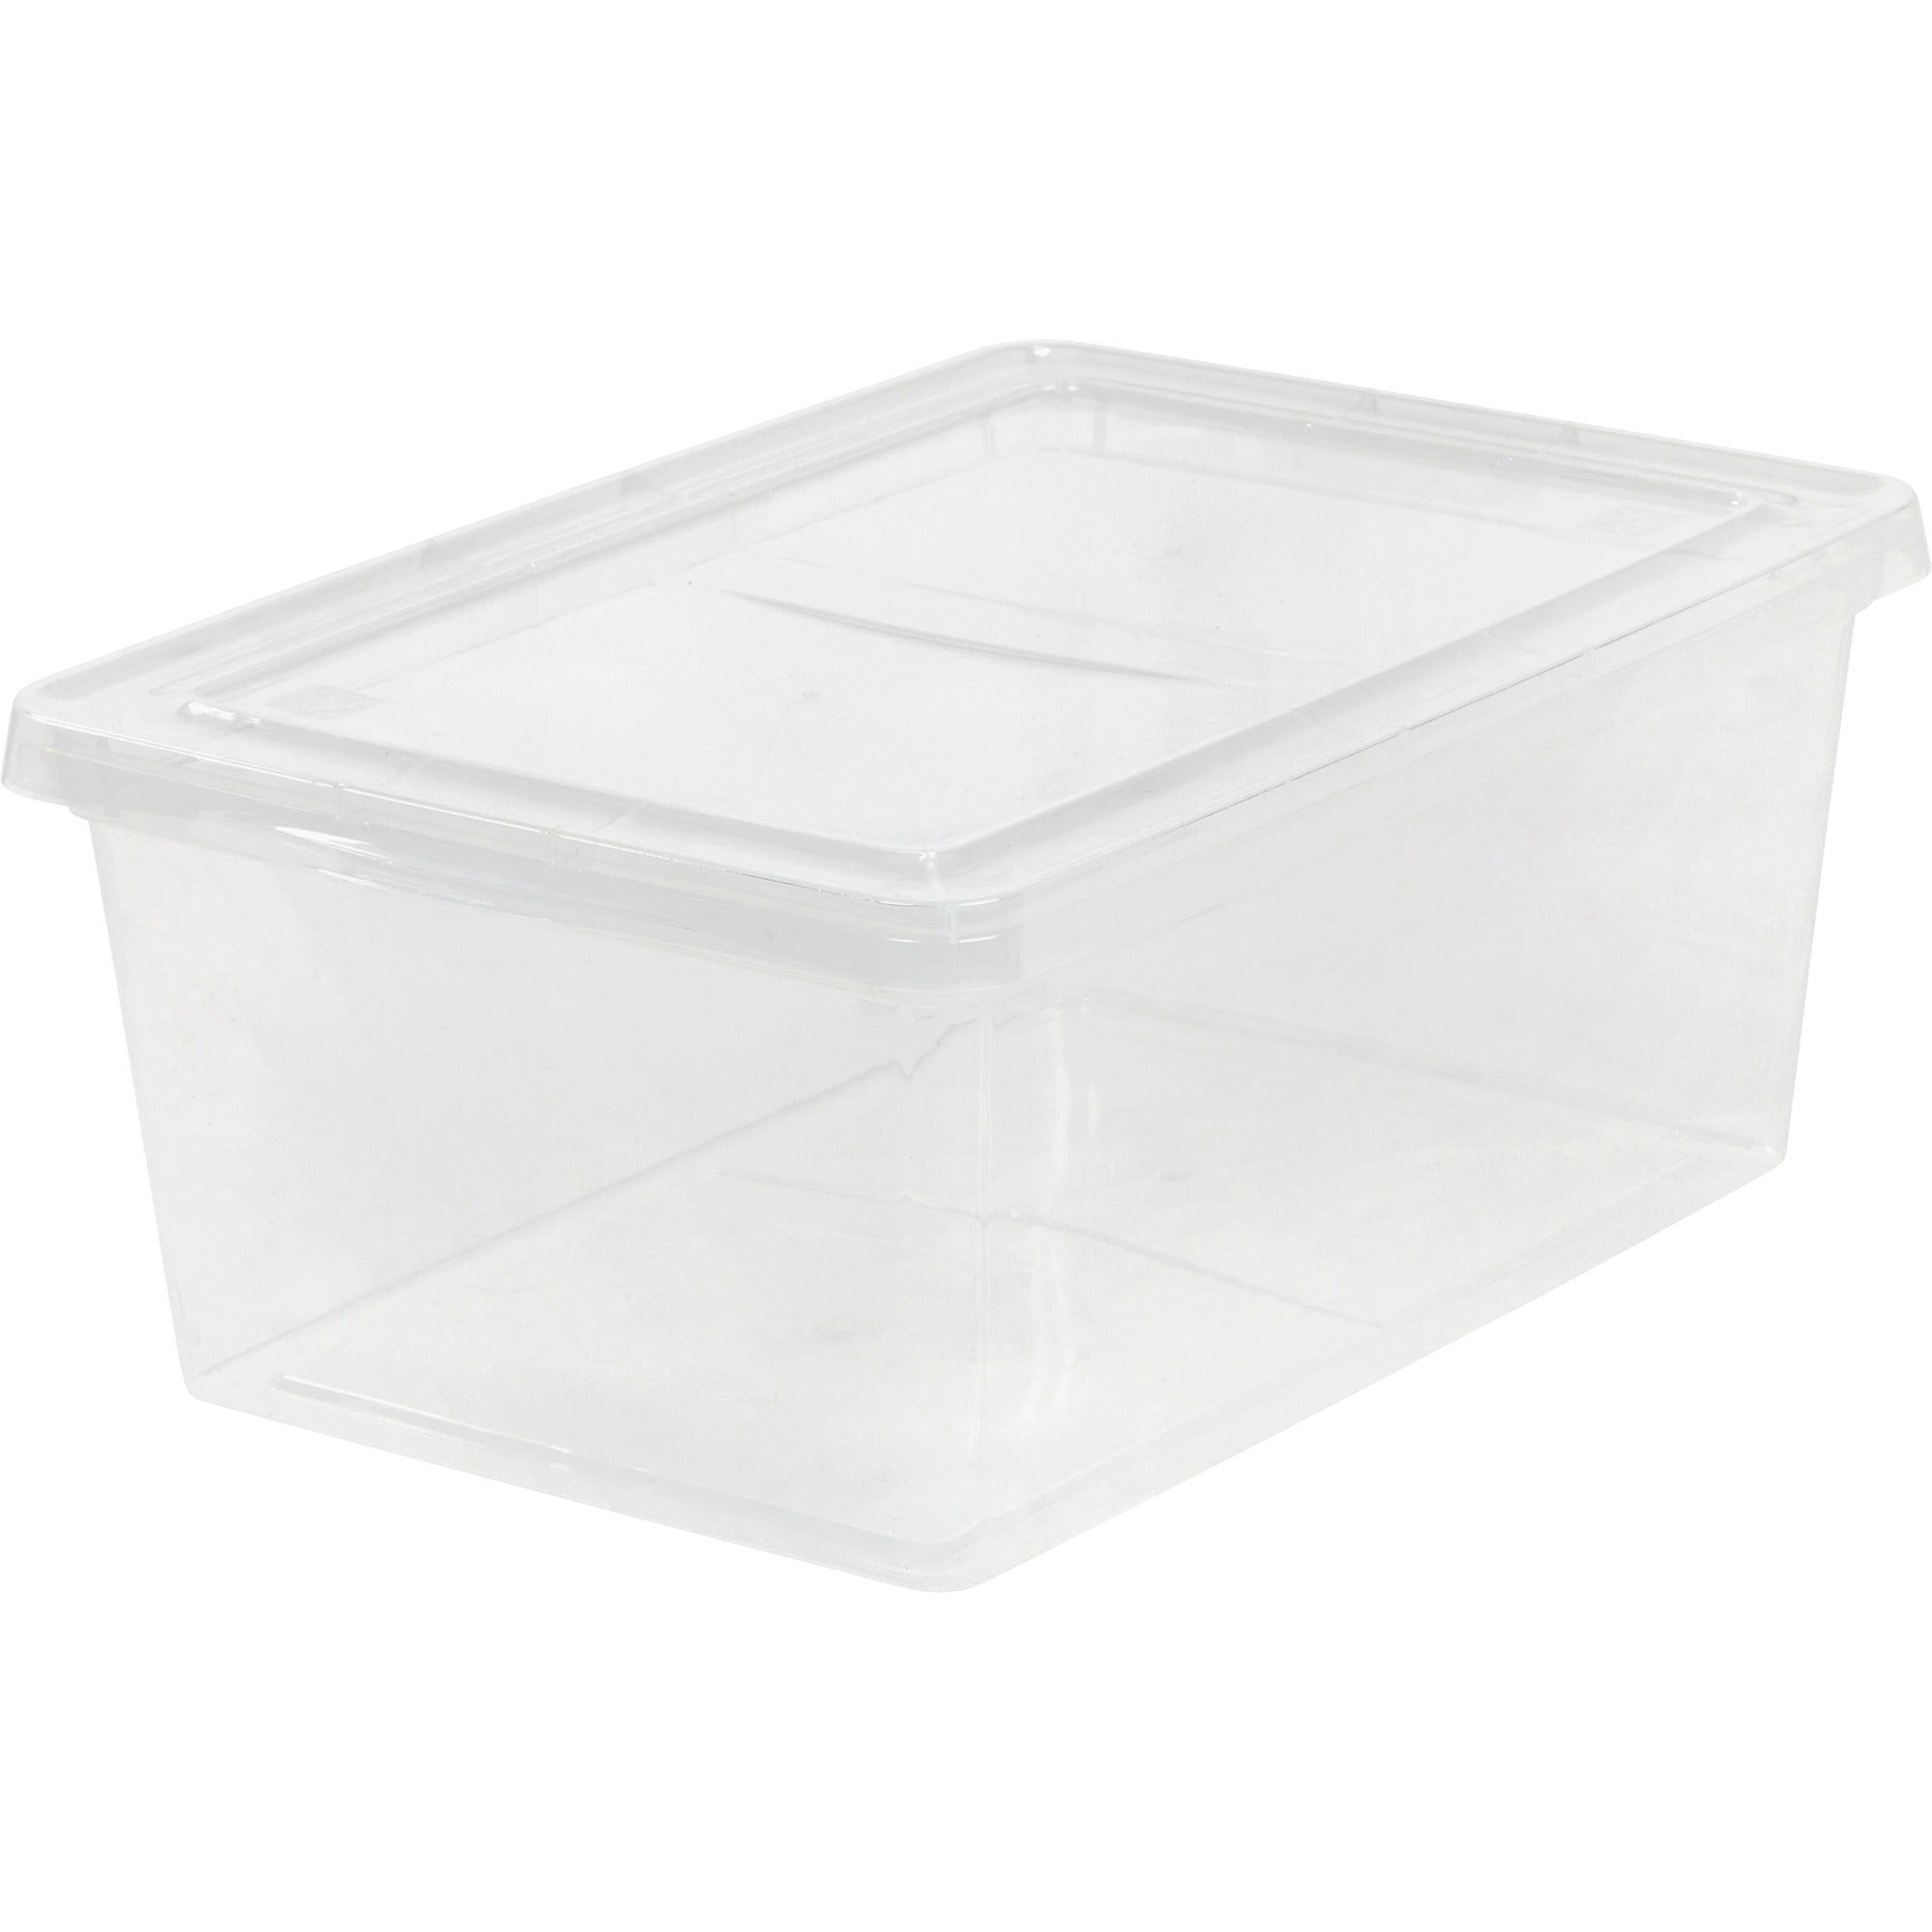 iris-17-quart-storage-box-external-dimensions-175-length-x-12-width-x-175-depth-x-7-height-425-gal-snap-in-lid-closure-stackable-plastic-clear-for-scissors-notebook-office-supplies-sweater-purse-towel-stapler-1-each_irs200410 - 1